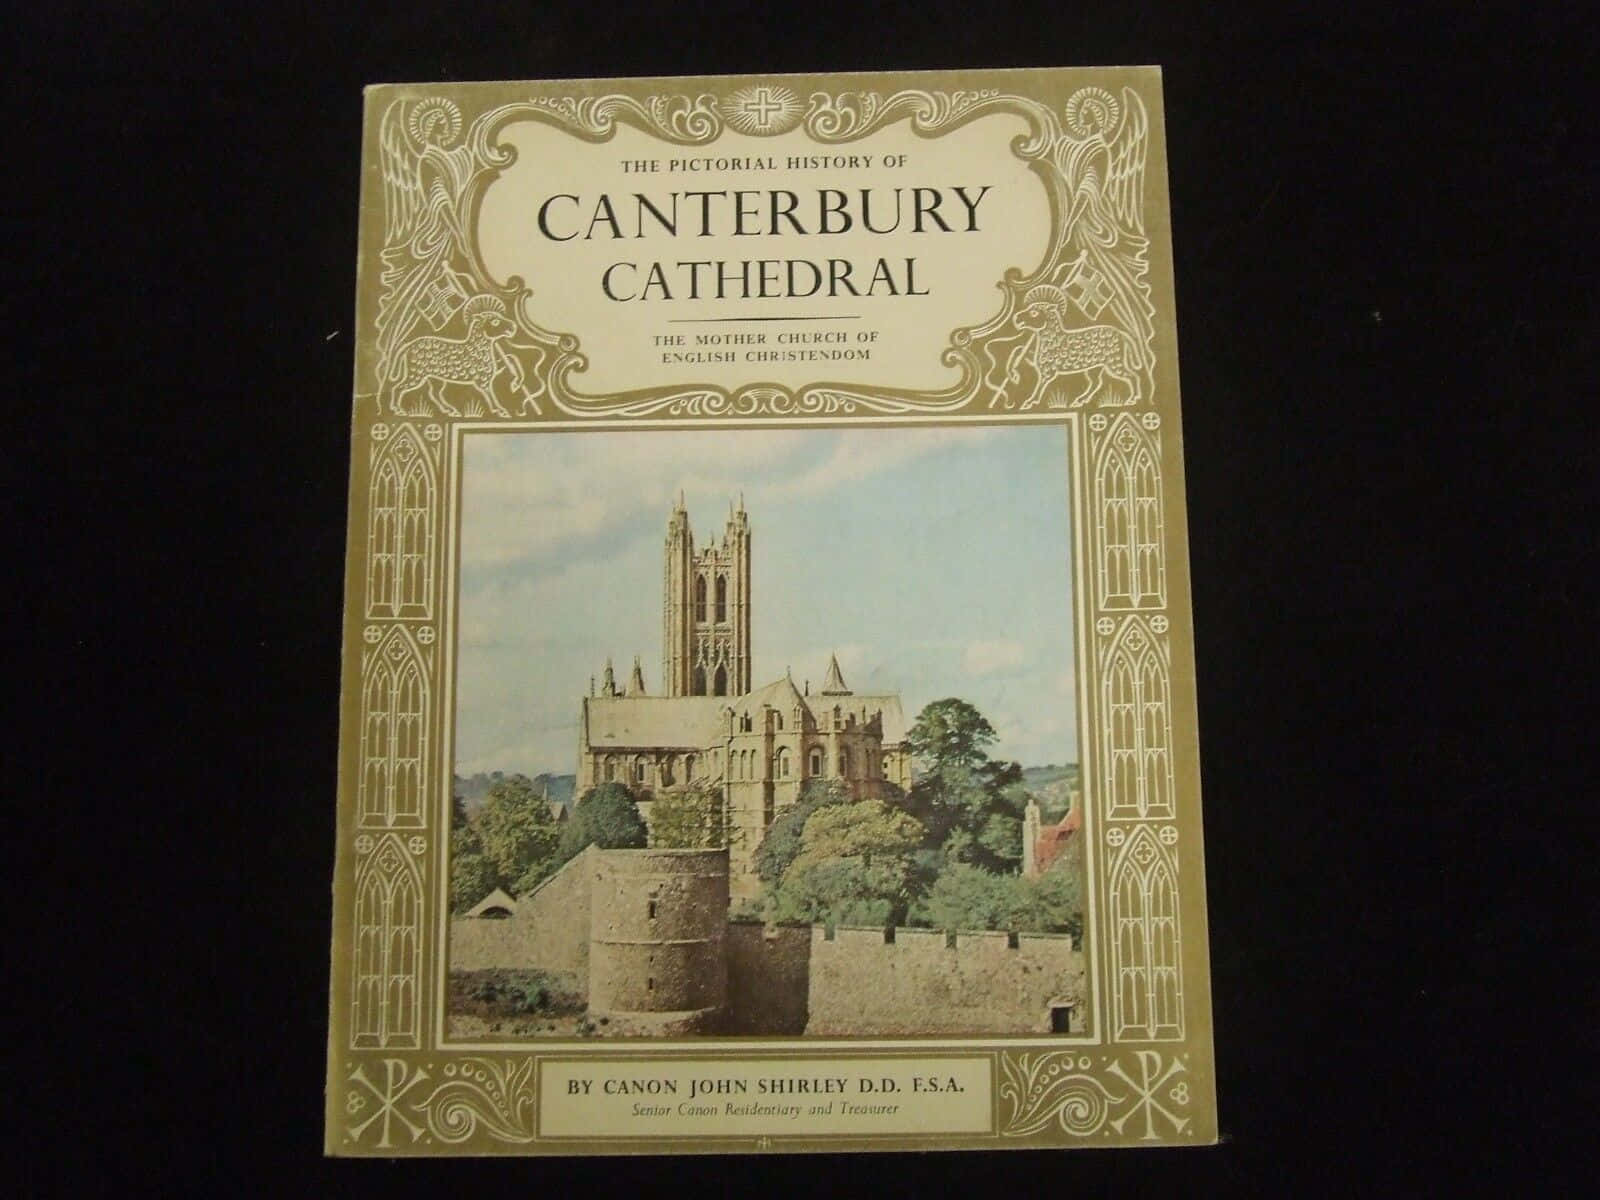 A Book Cover About The Canterbury Cathedral Wallpaper